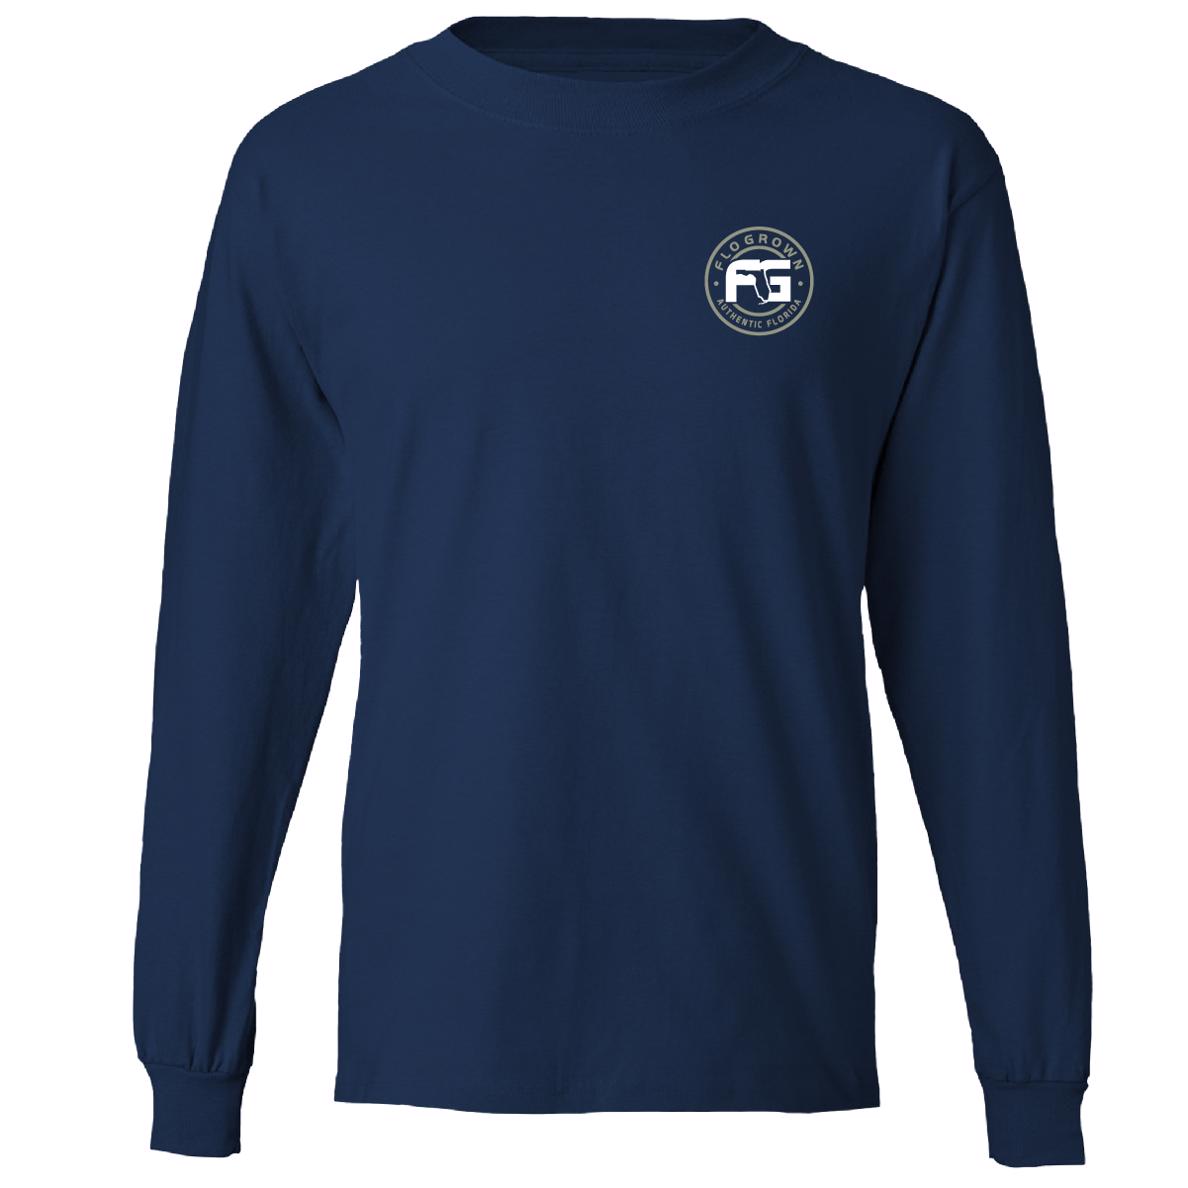 Local Gators Youth Long Sleeve Tee (front)